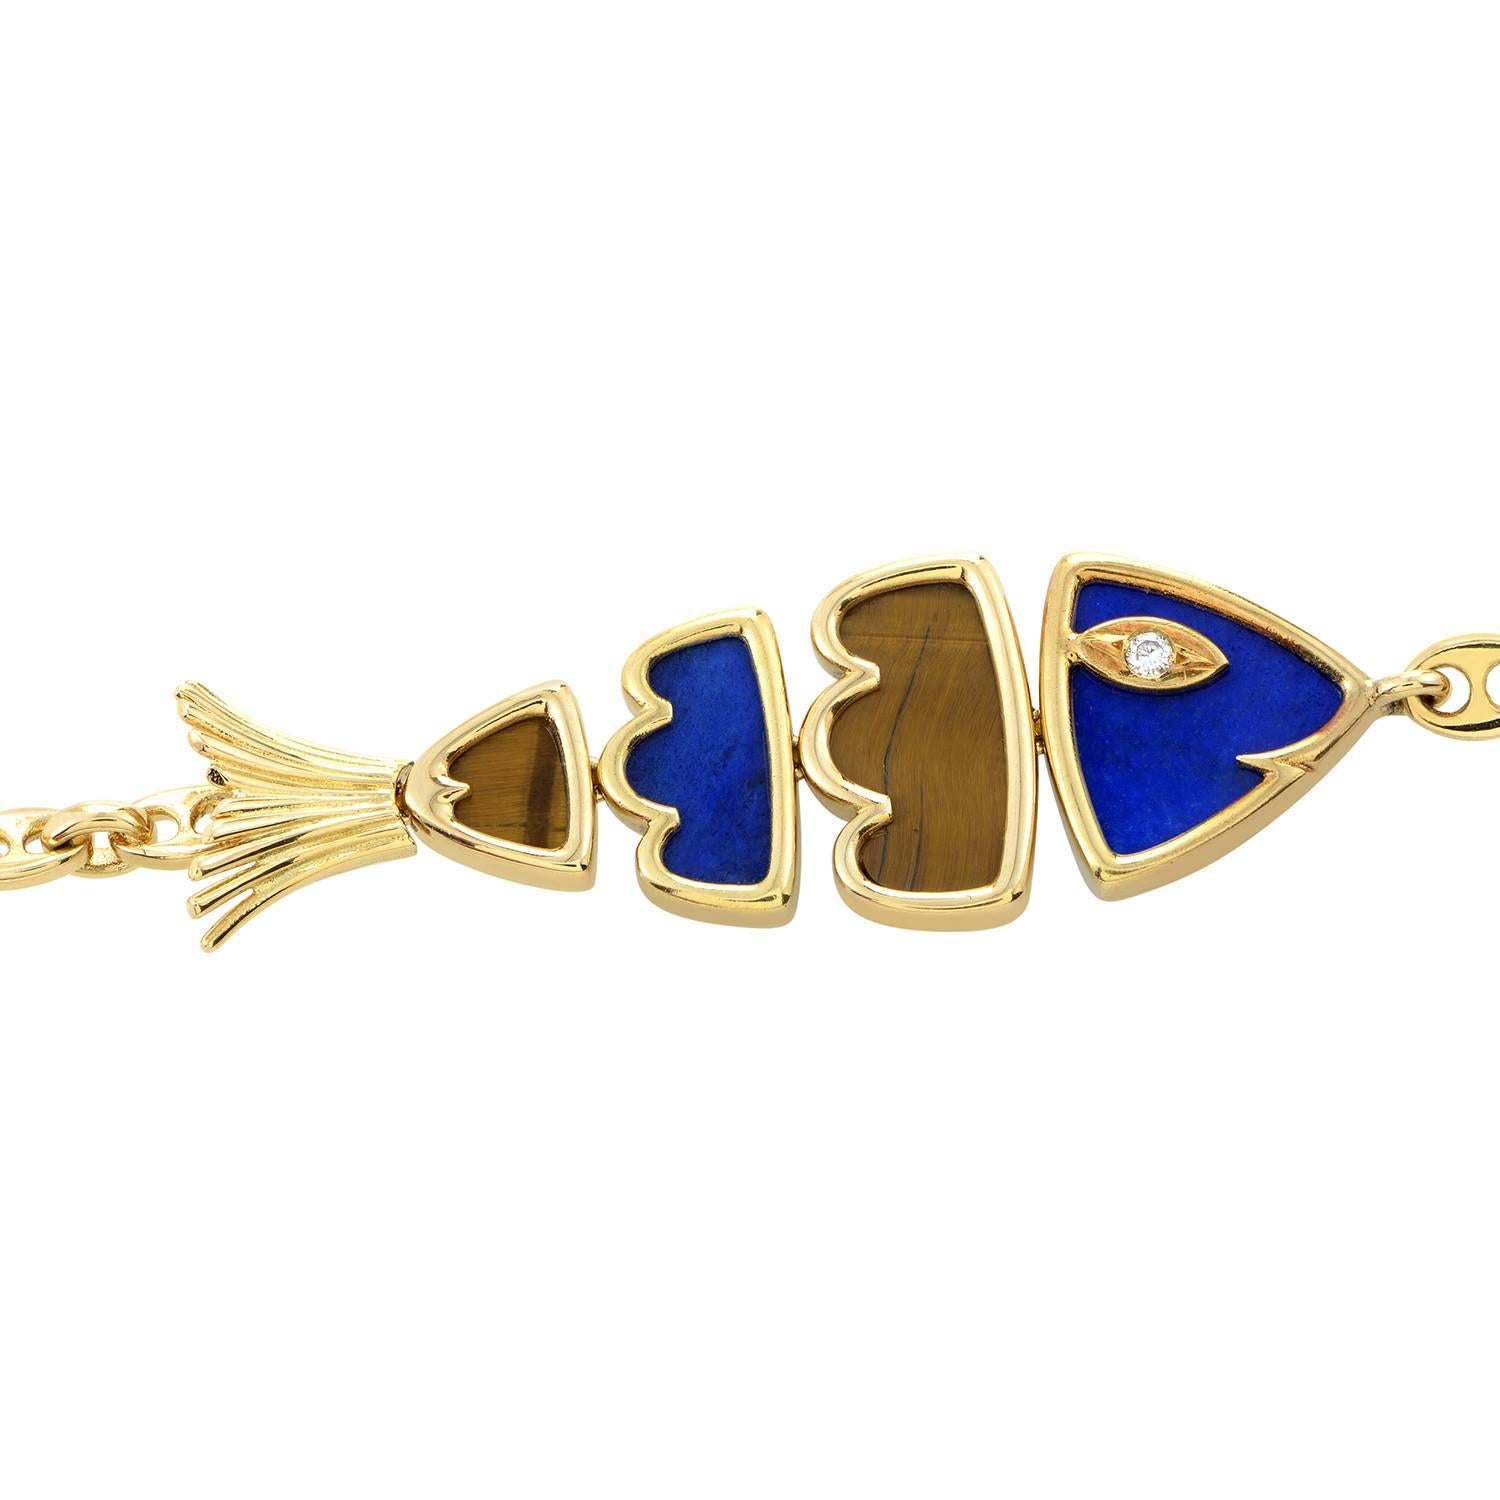 Swim in a sea of style with this posh bracelet from Van Cleef & Arpels! The bracelet is made of 18K yellow gold and features an adorable fish charm made of lapis lazuli and tiger's eye panels. Lastly, the fish looks out with a diamond eye.
Included